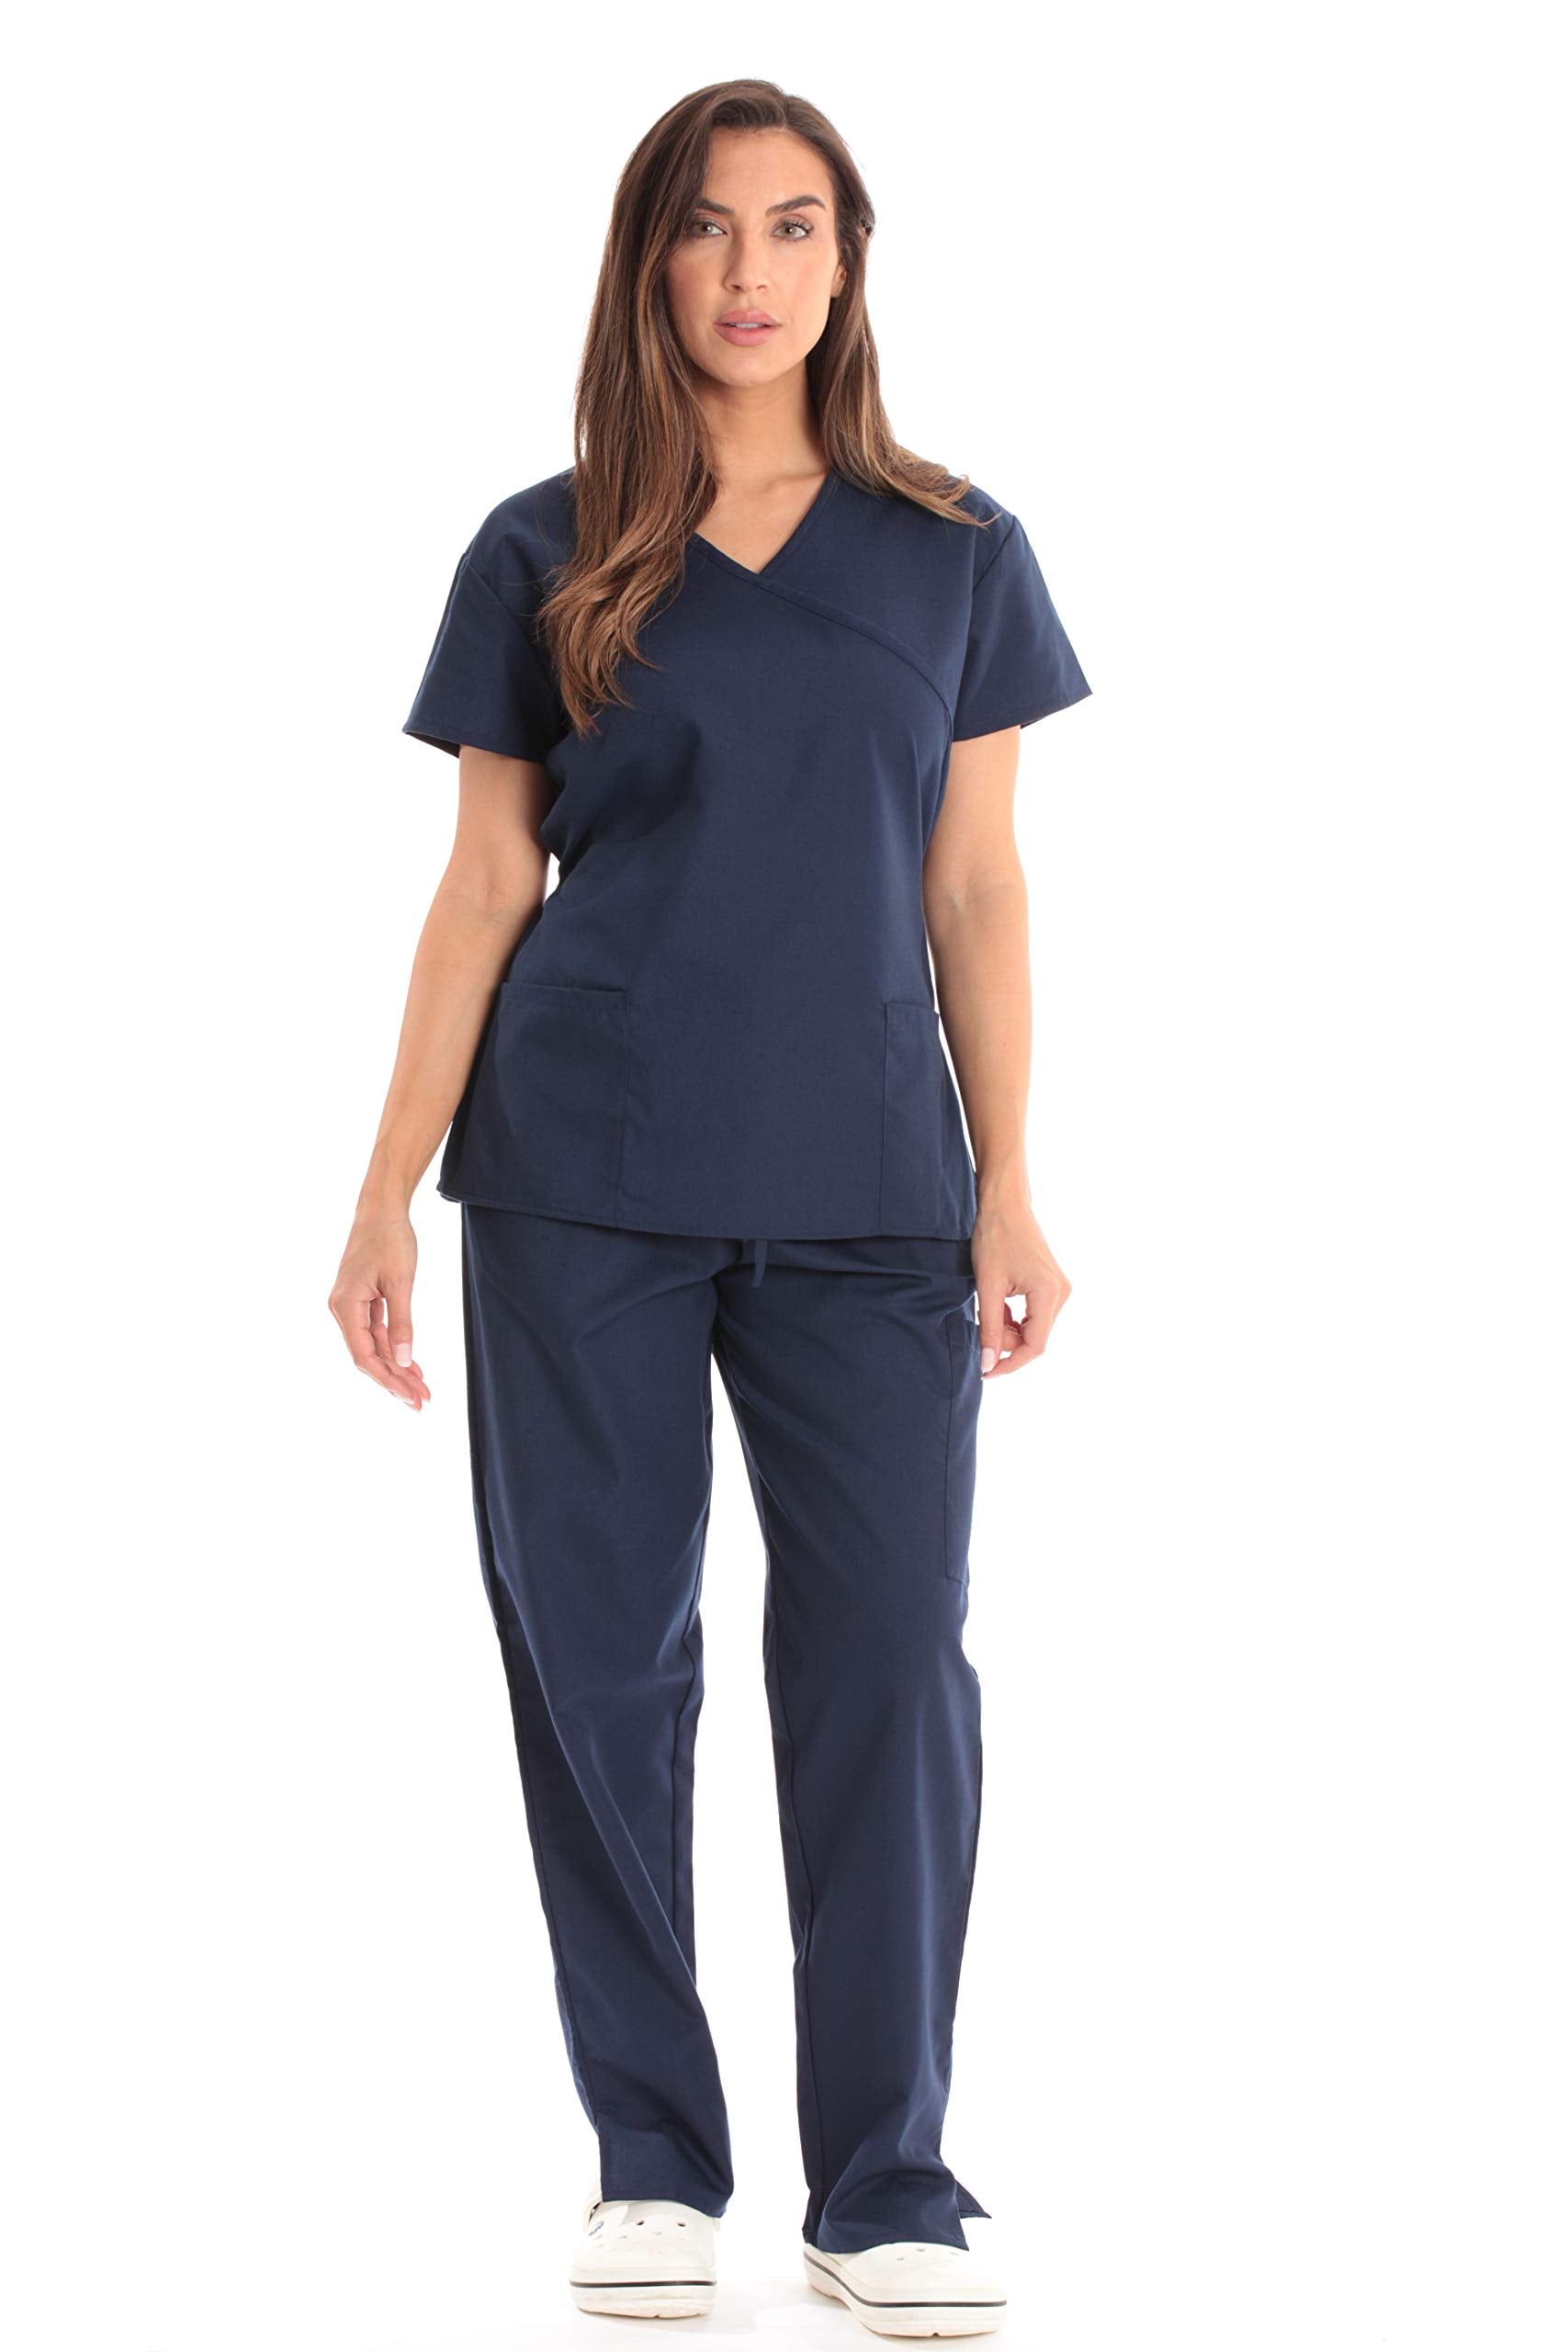 Just Love Women's Scrub Sets Medical Scrubs (Mock Wrap) - Comfortable and  Professional Uniform in (Black with Black Trim, X-Large)